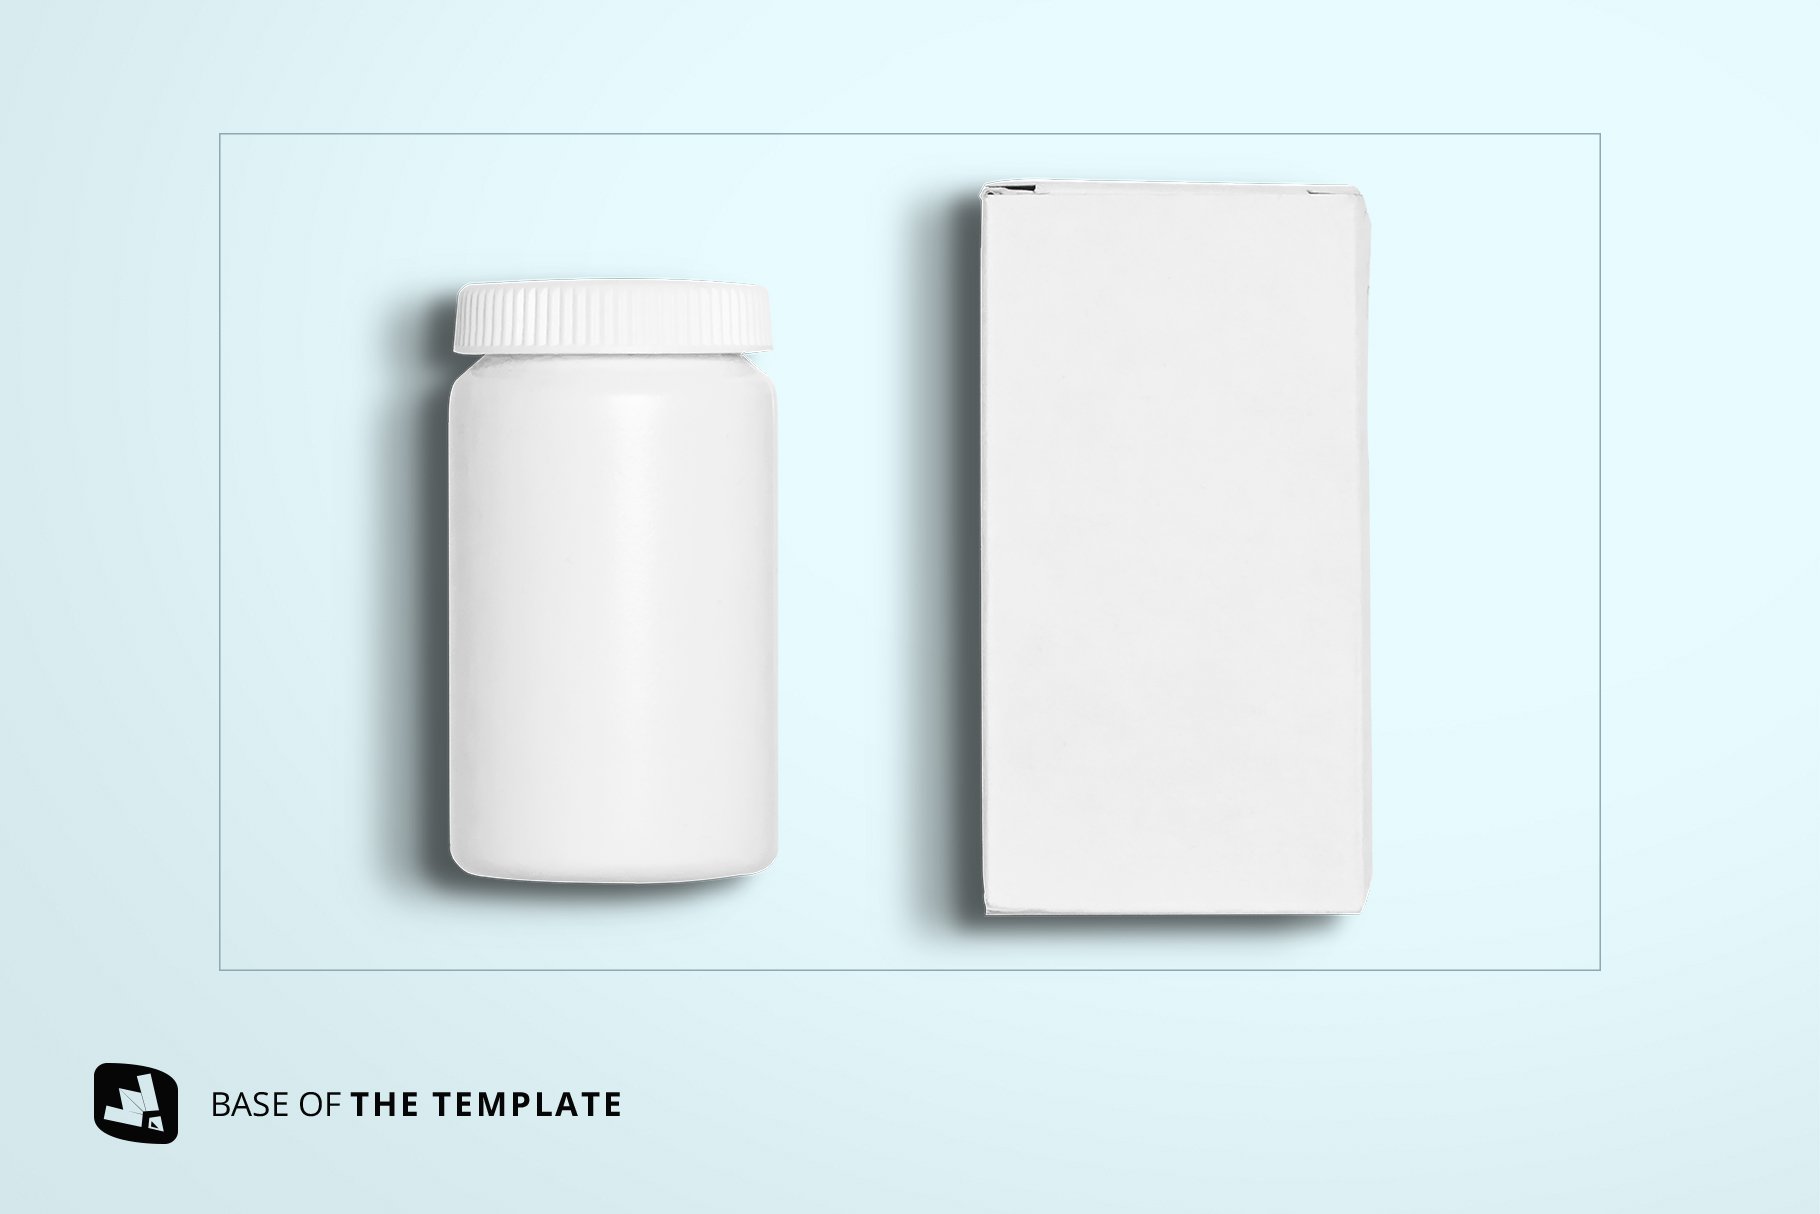 Top View Pill Bottle Packaging Mockup